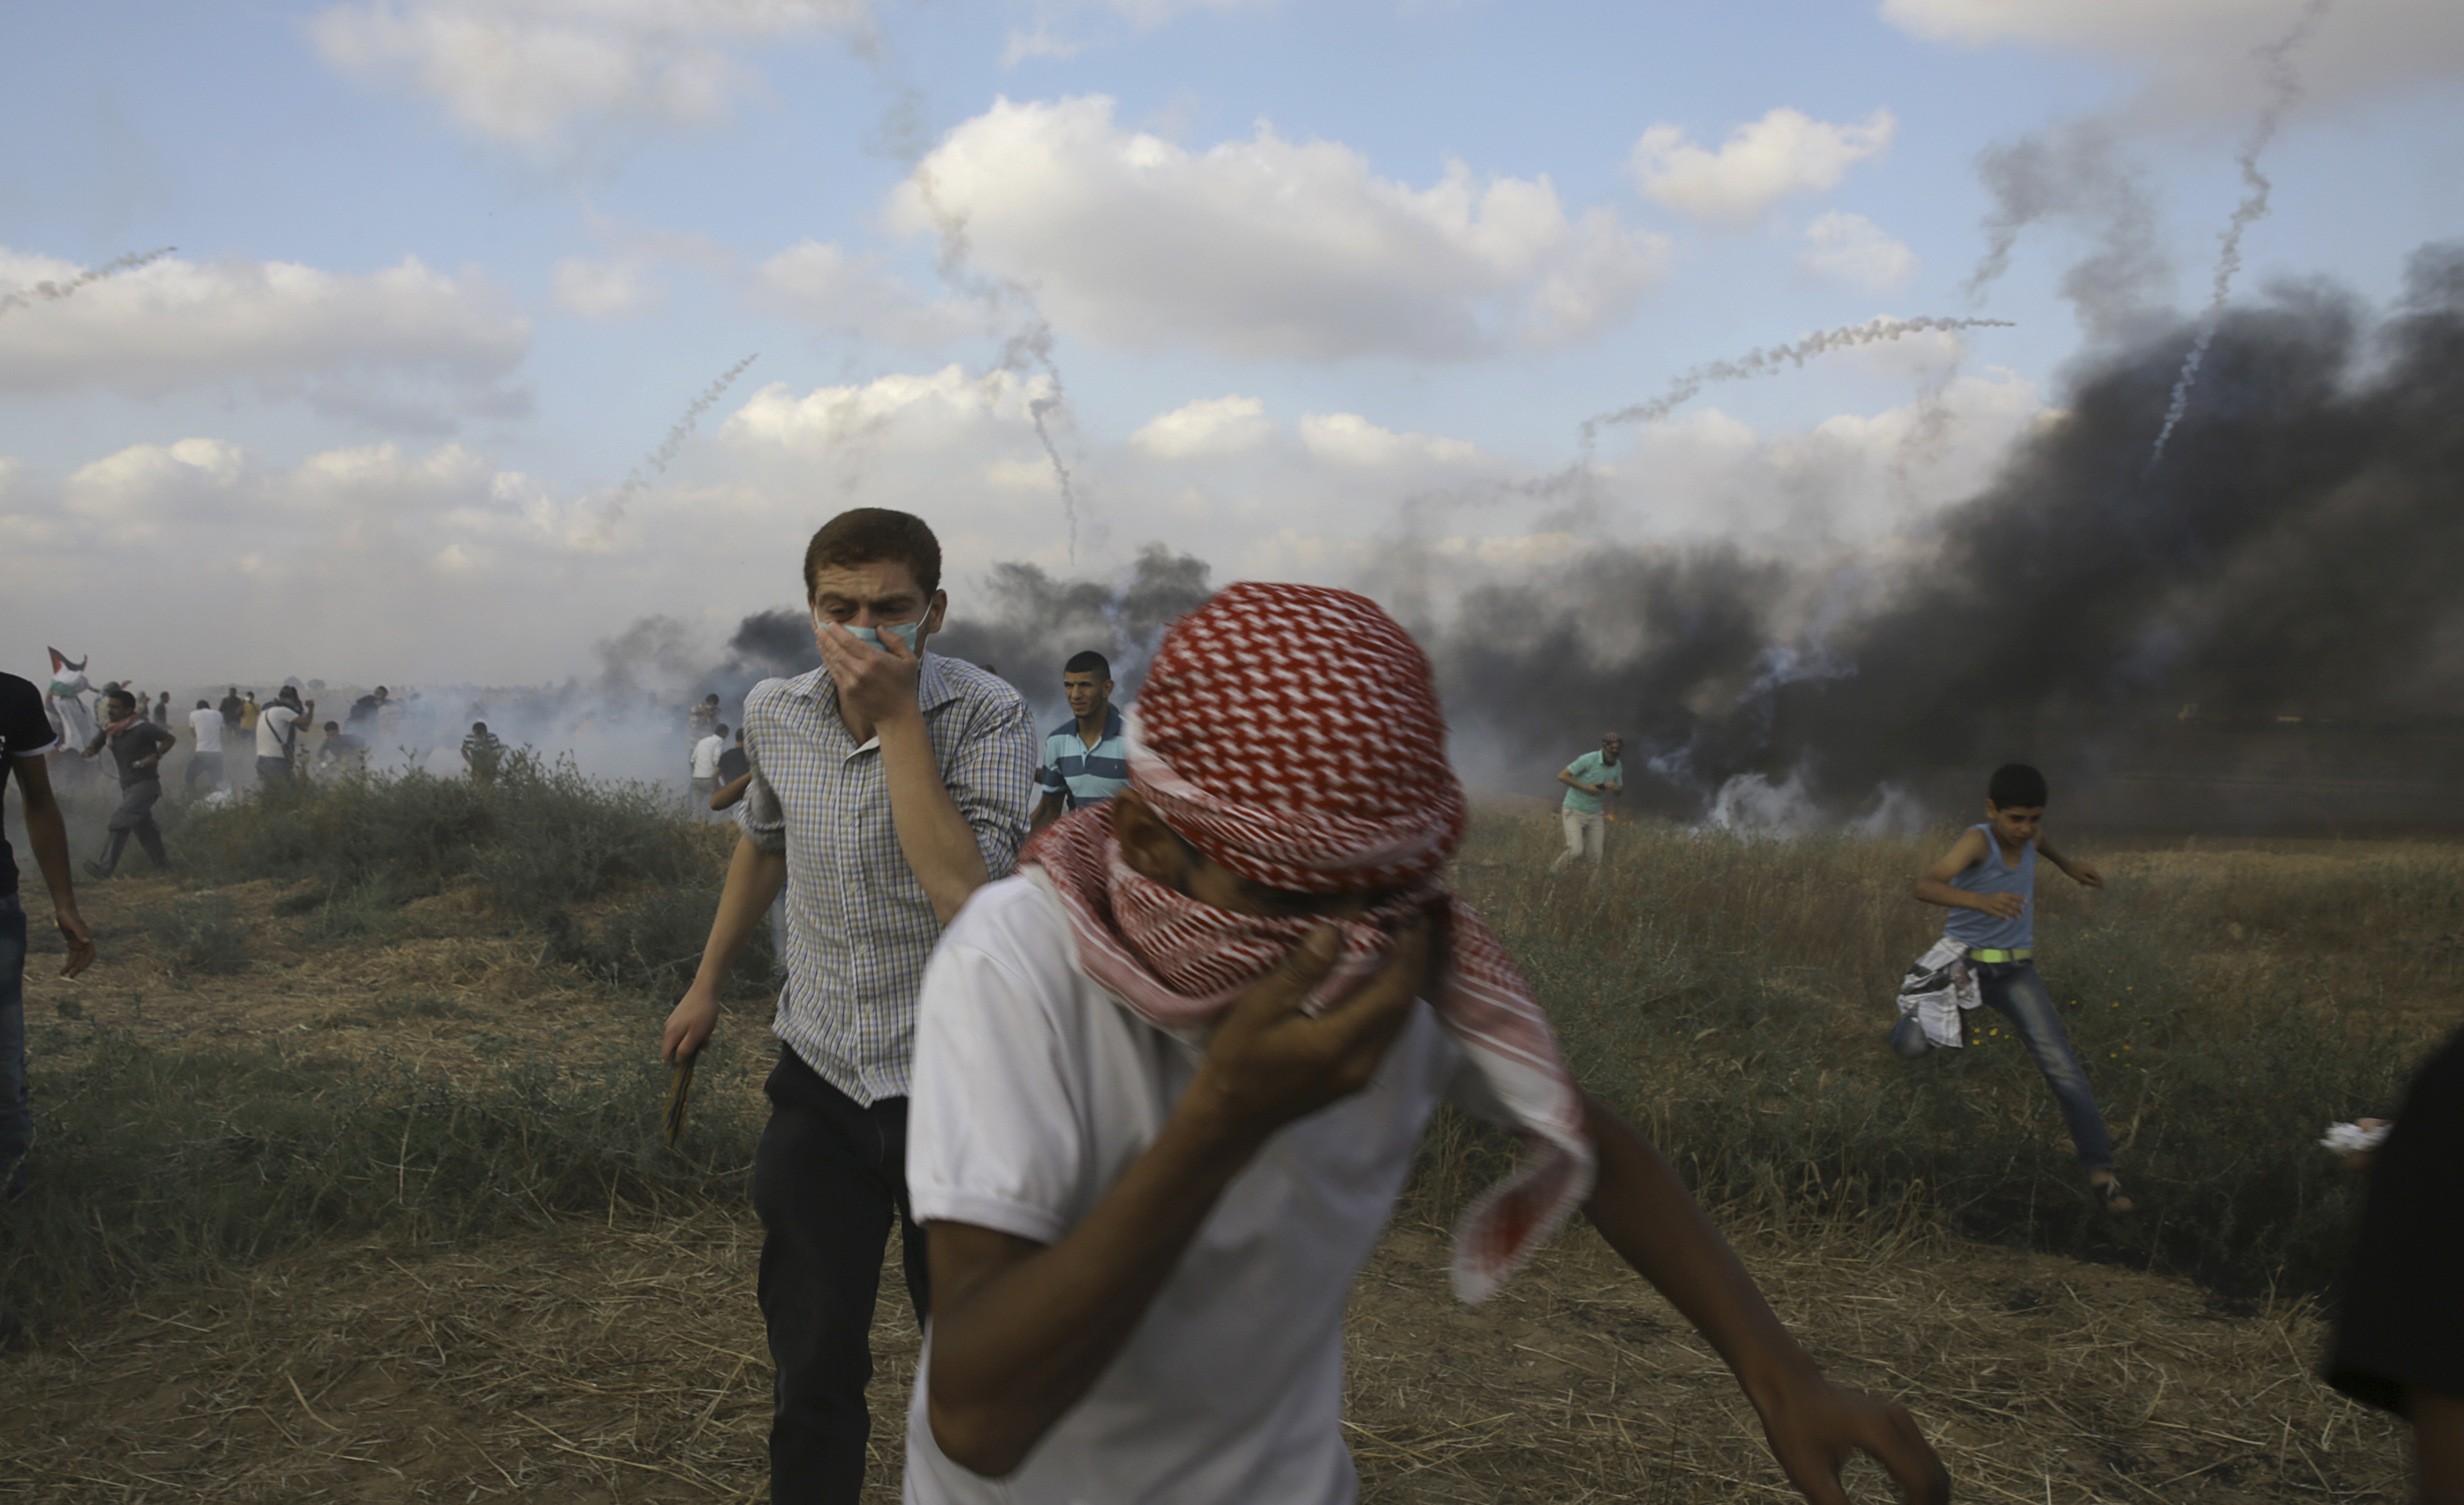 Palestinian protesters take cover from teargas fired by Israeli troops